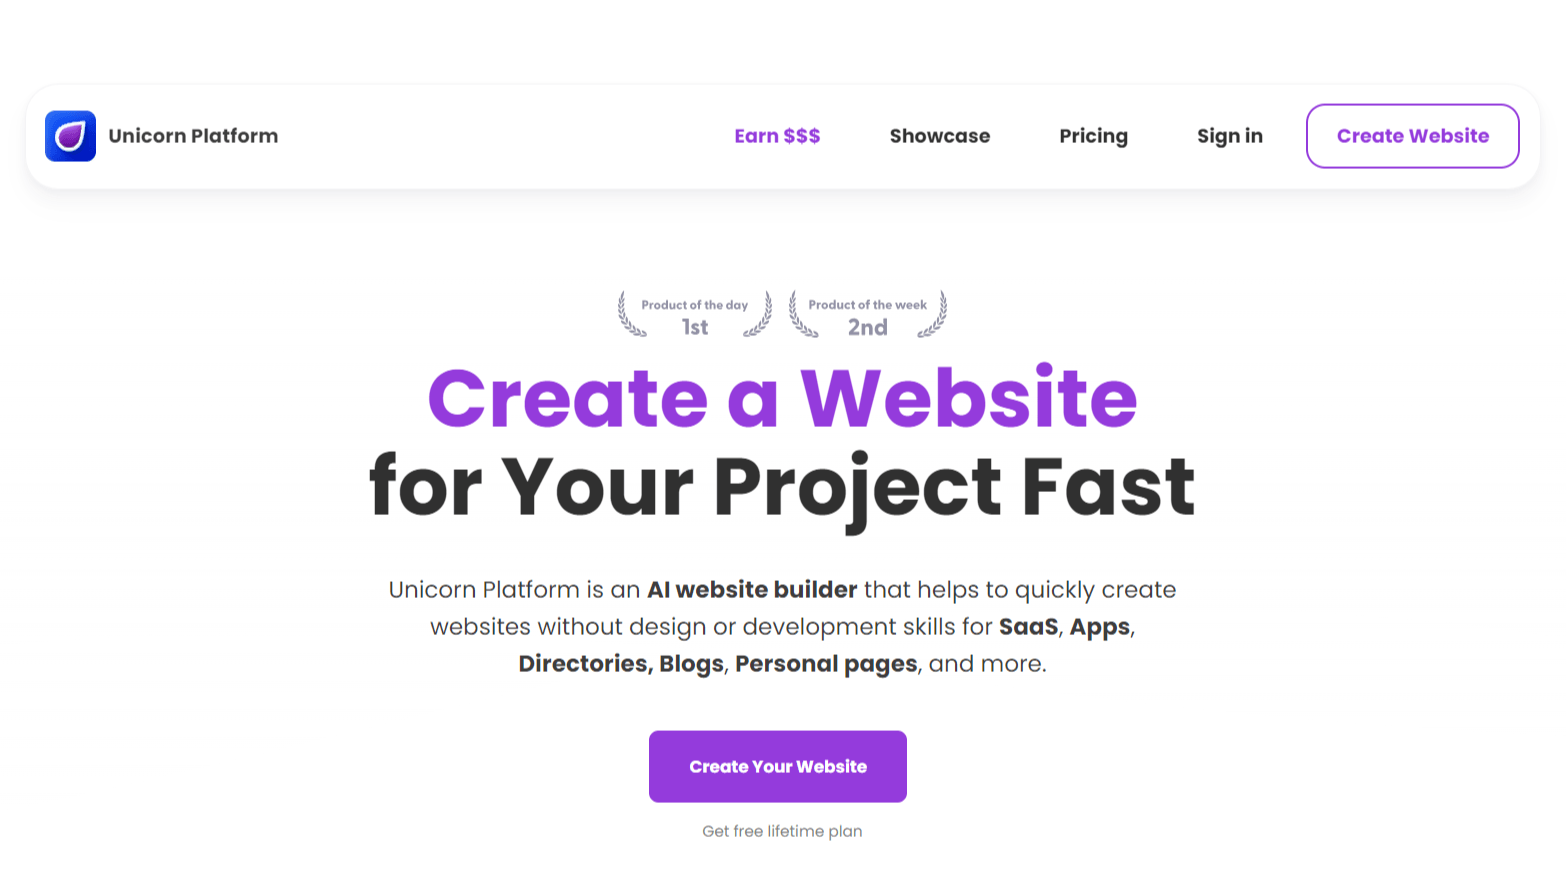 Unicorn Platform - AI Website Builder to Save Time for Busy Business Owners